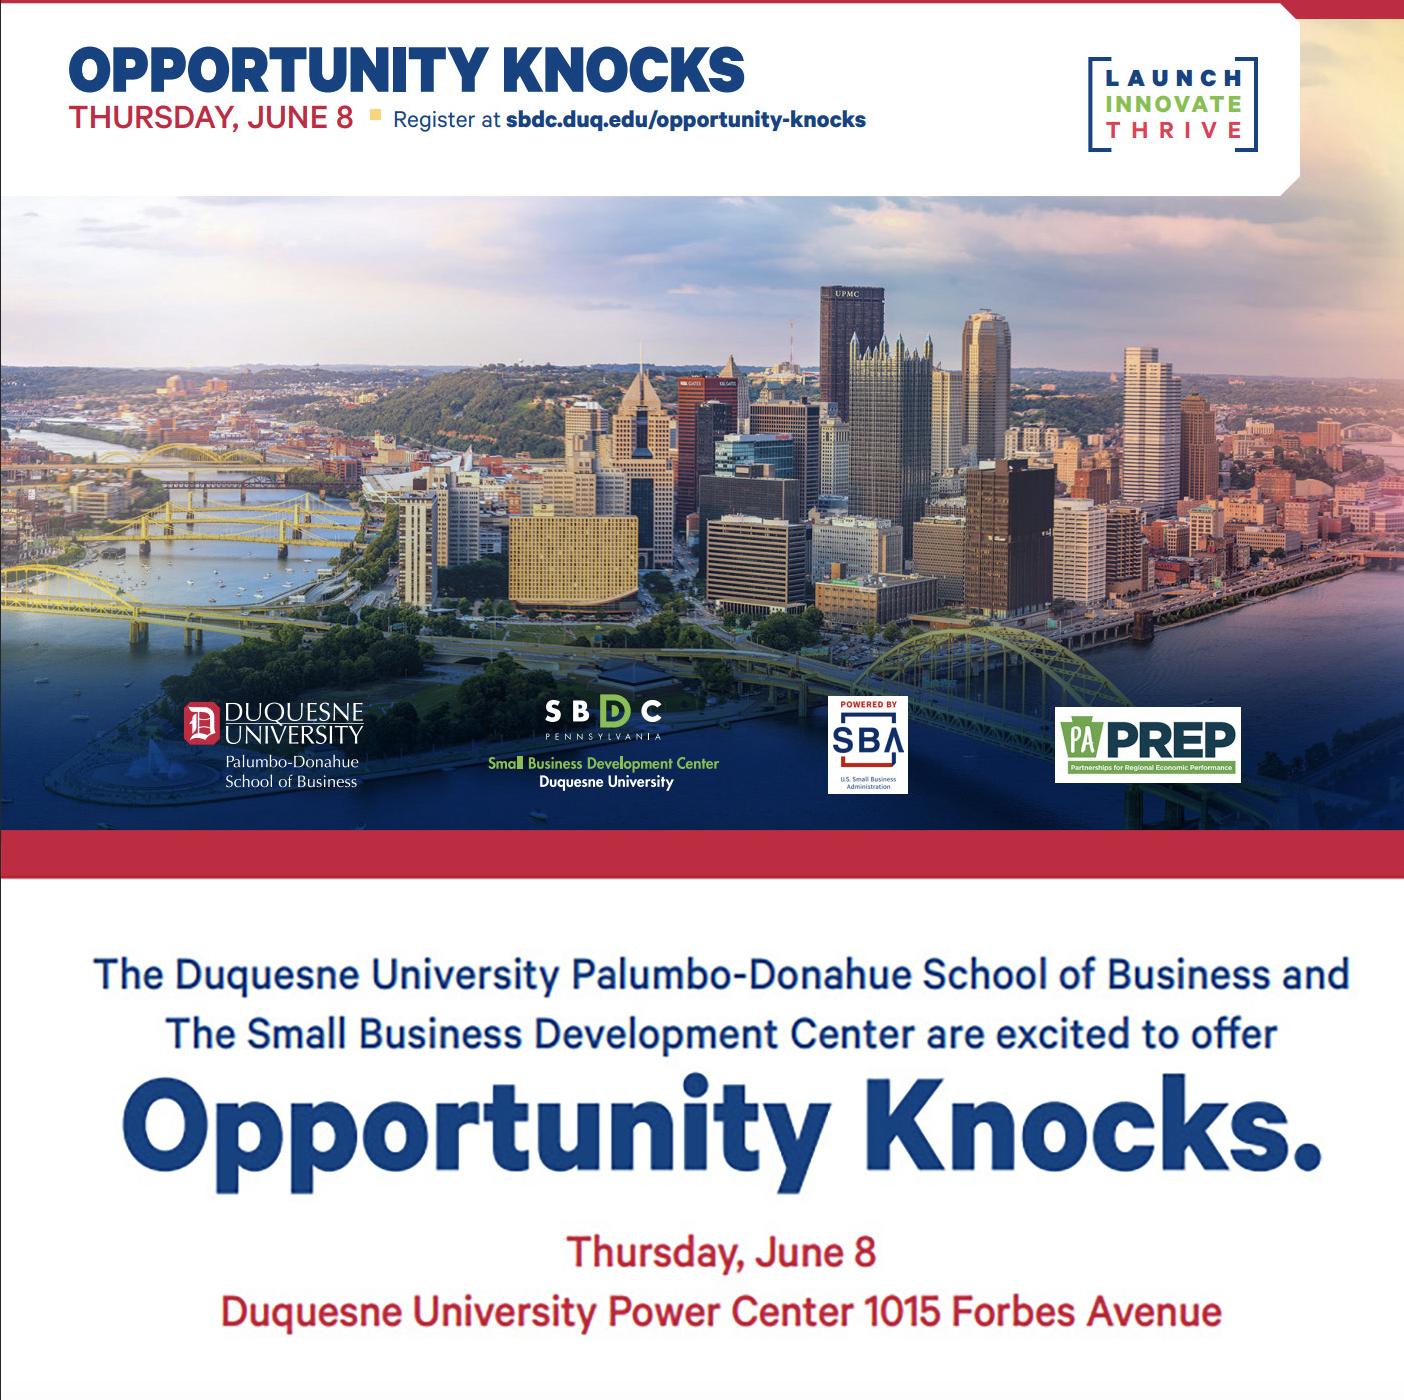 Duquesne Opportunity Knocks Event